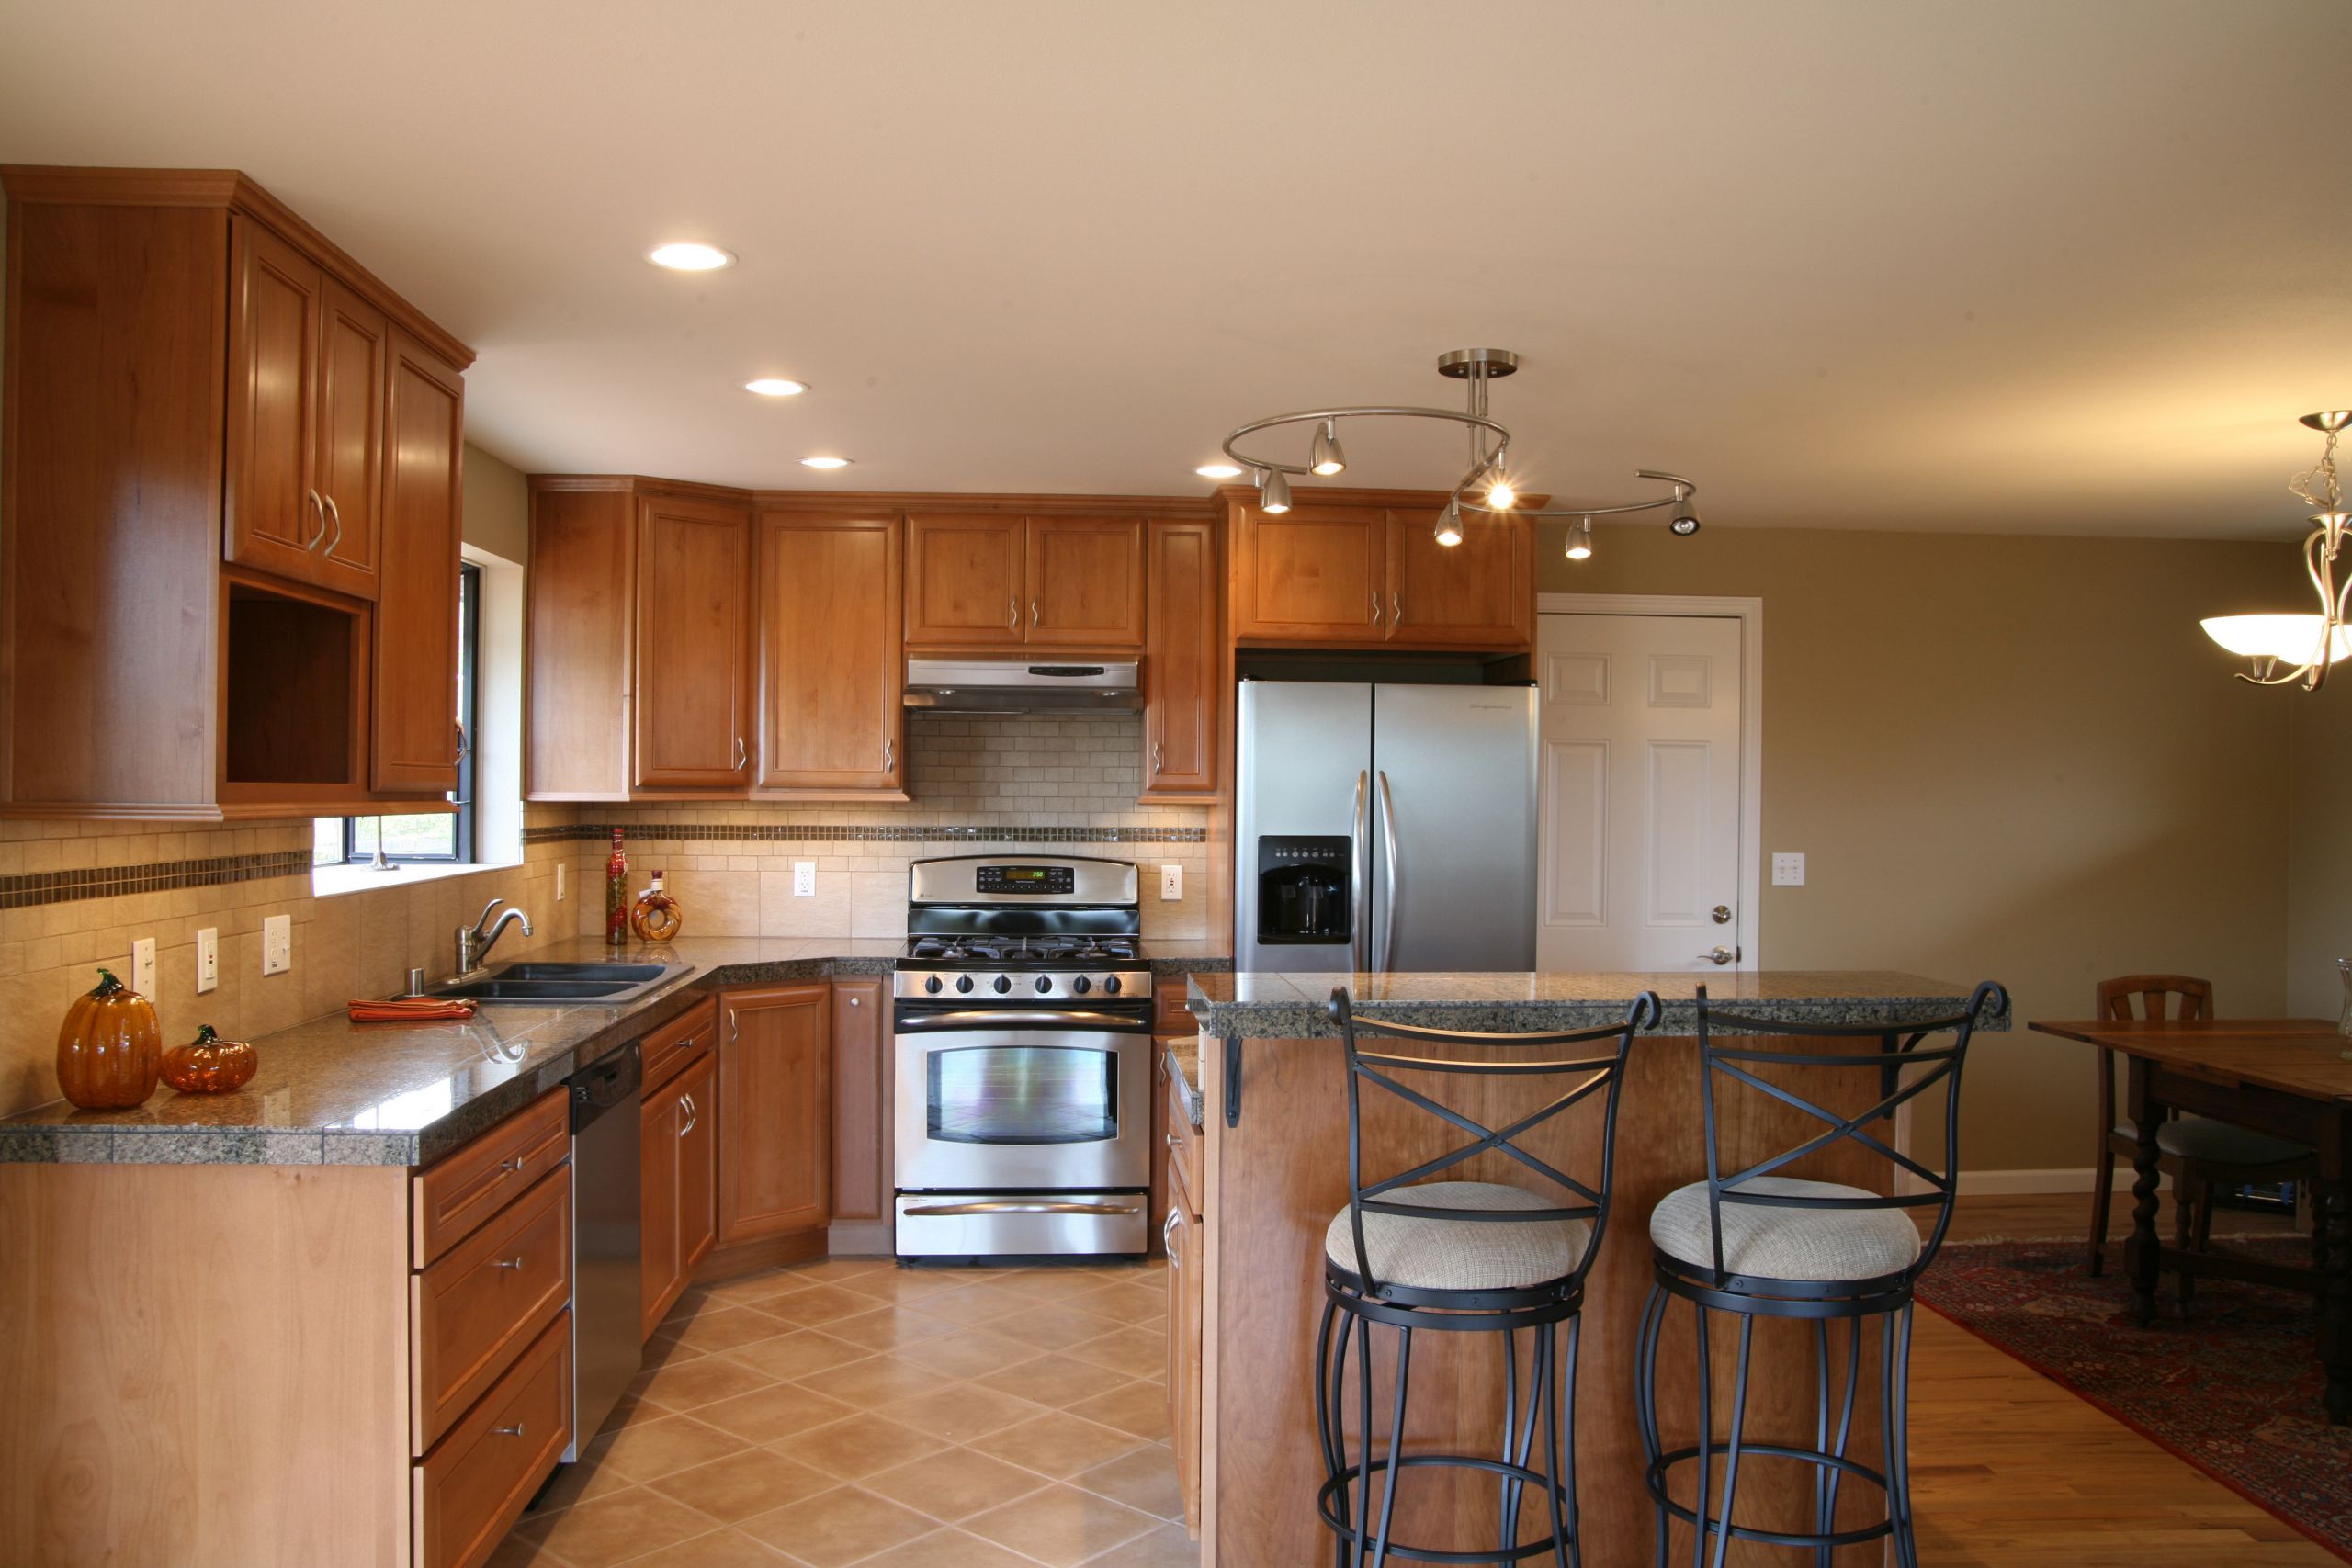 Kitchen Remodeling Blog
 Add value to your home with Upscale Kitchen Remodeling